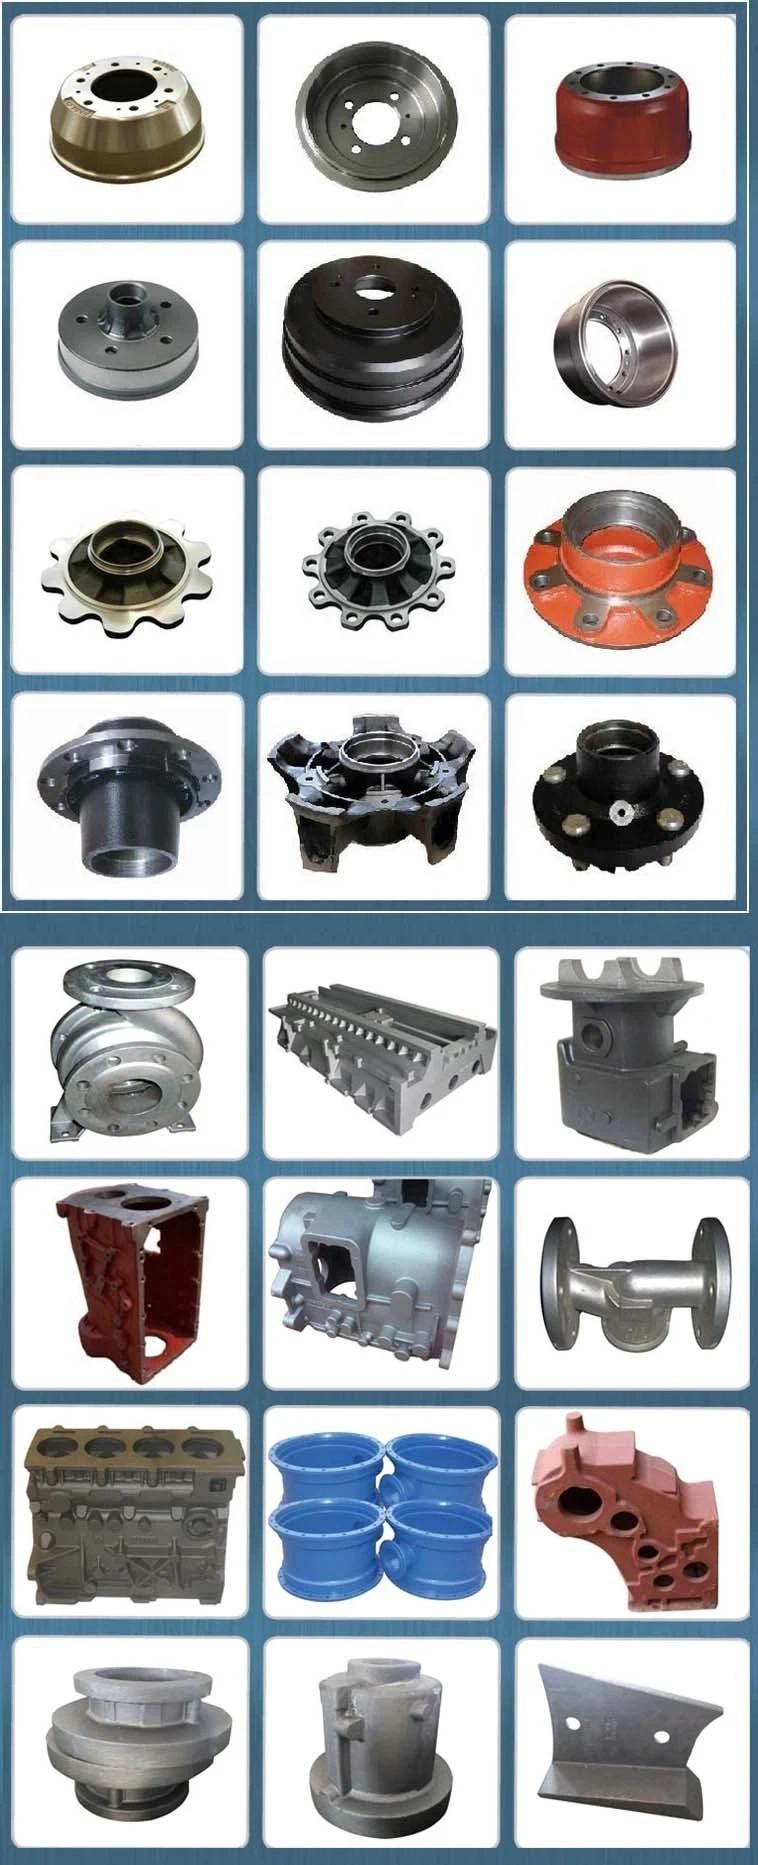 OEM ODM Cast Steel/Aluminum Alloy/Stainless Steel Farm Equipment Machinery Parts in Investment Die Casting